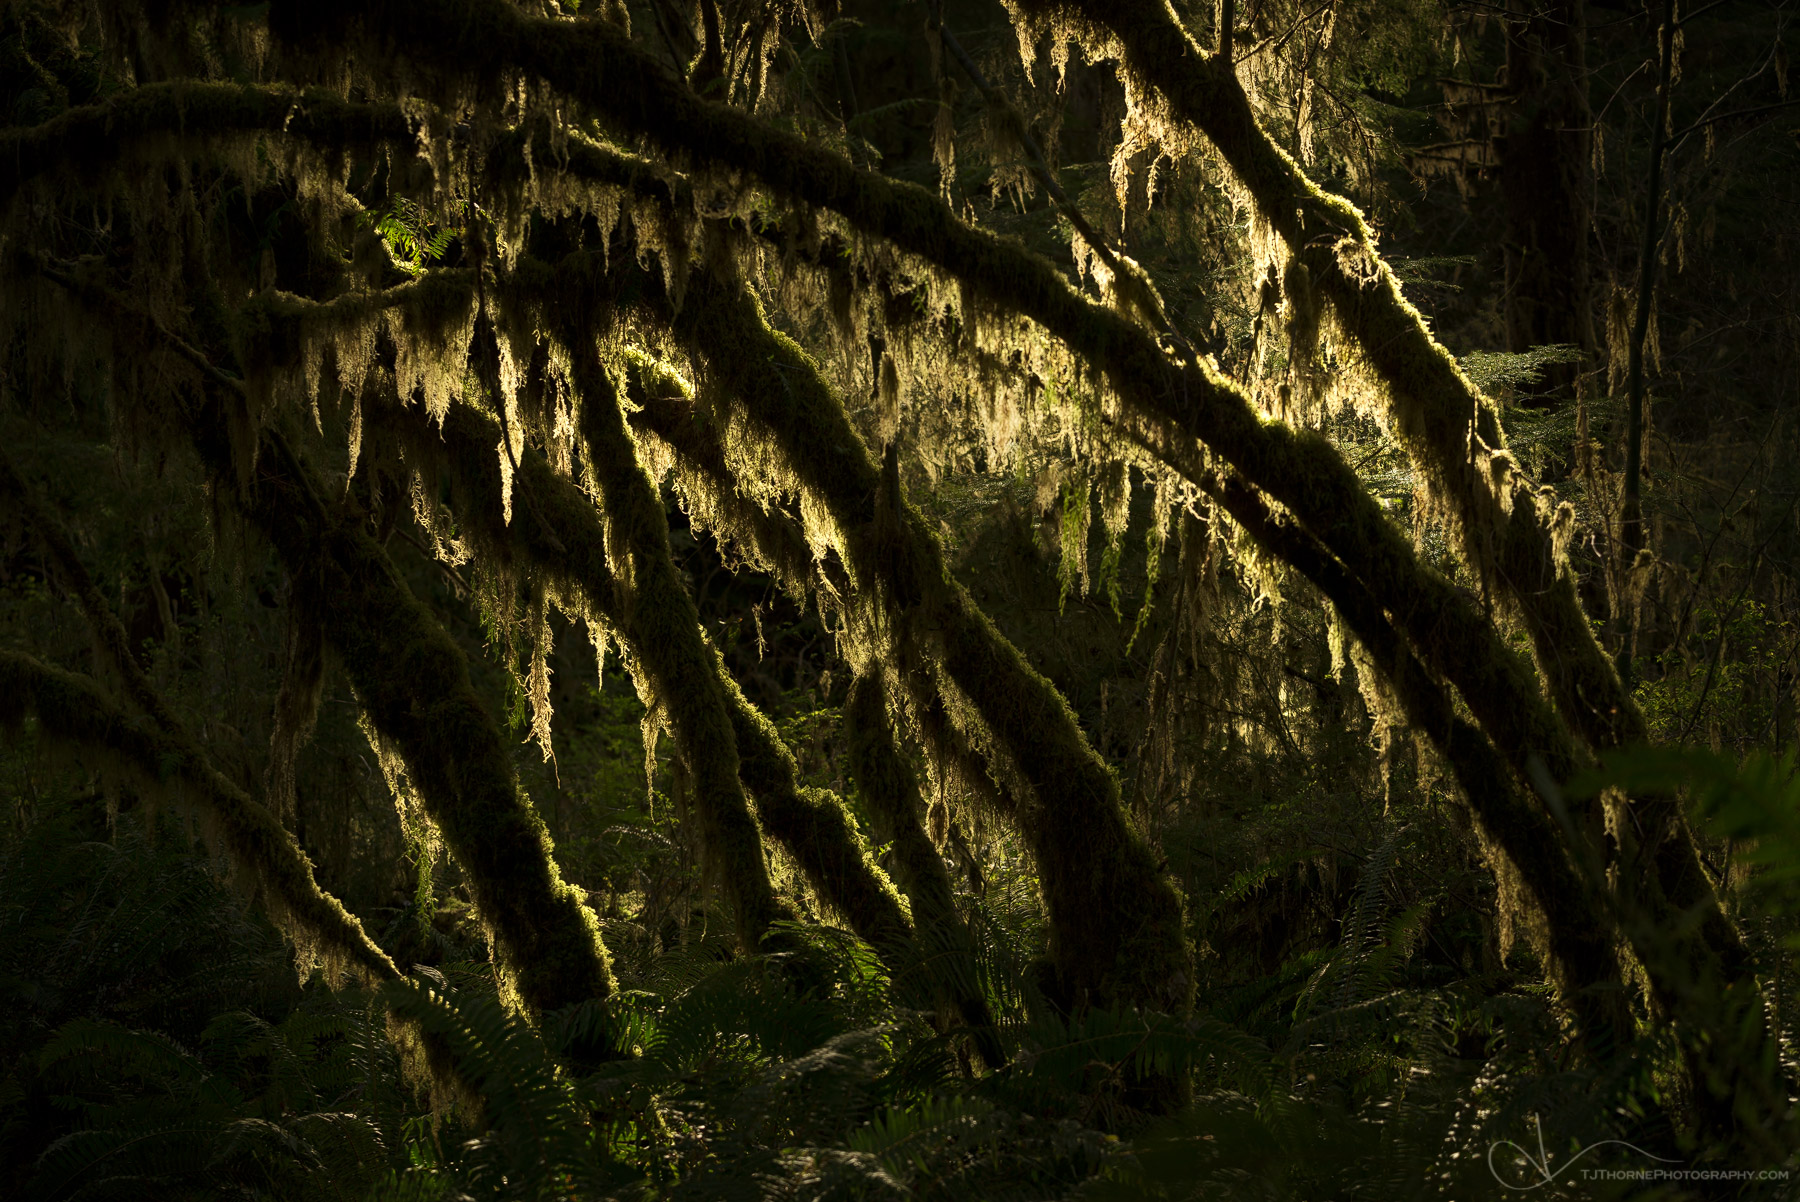 Mossy vine maples in Olympic National Park, Washington.